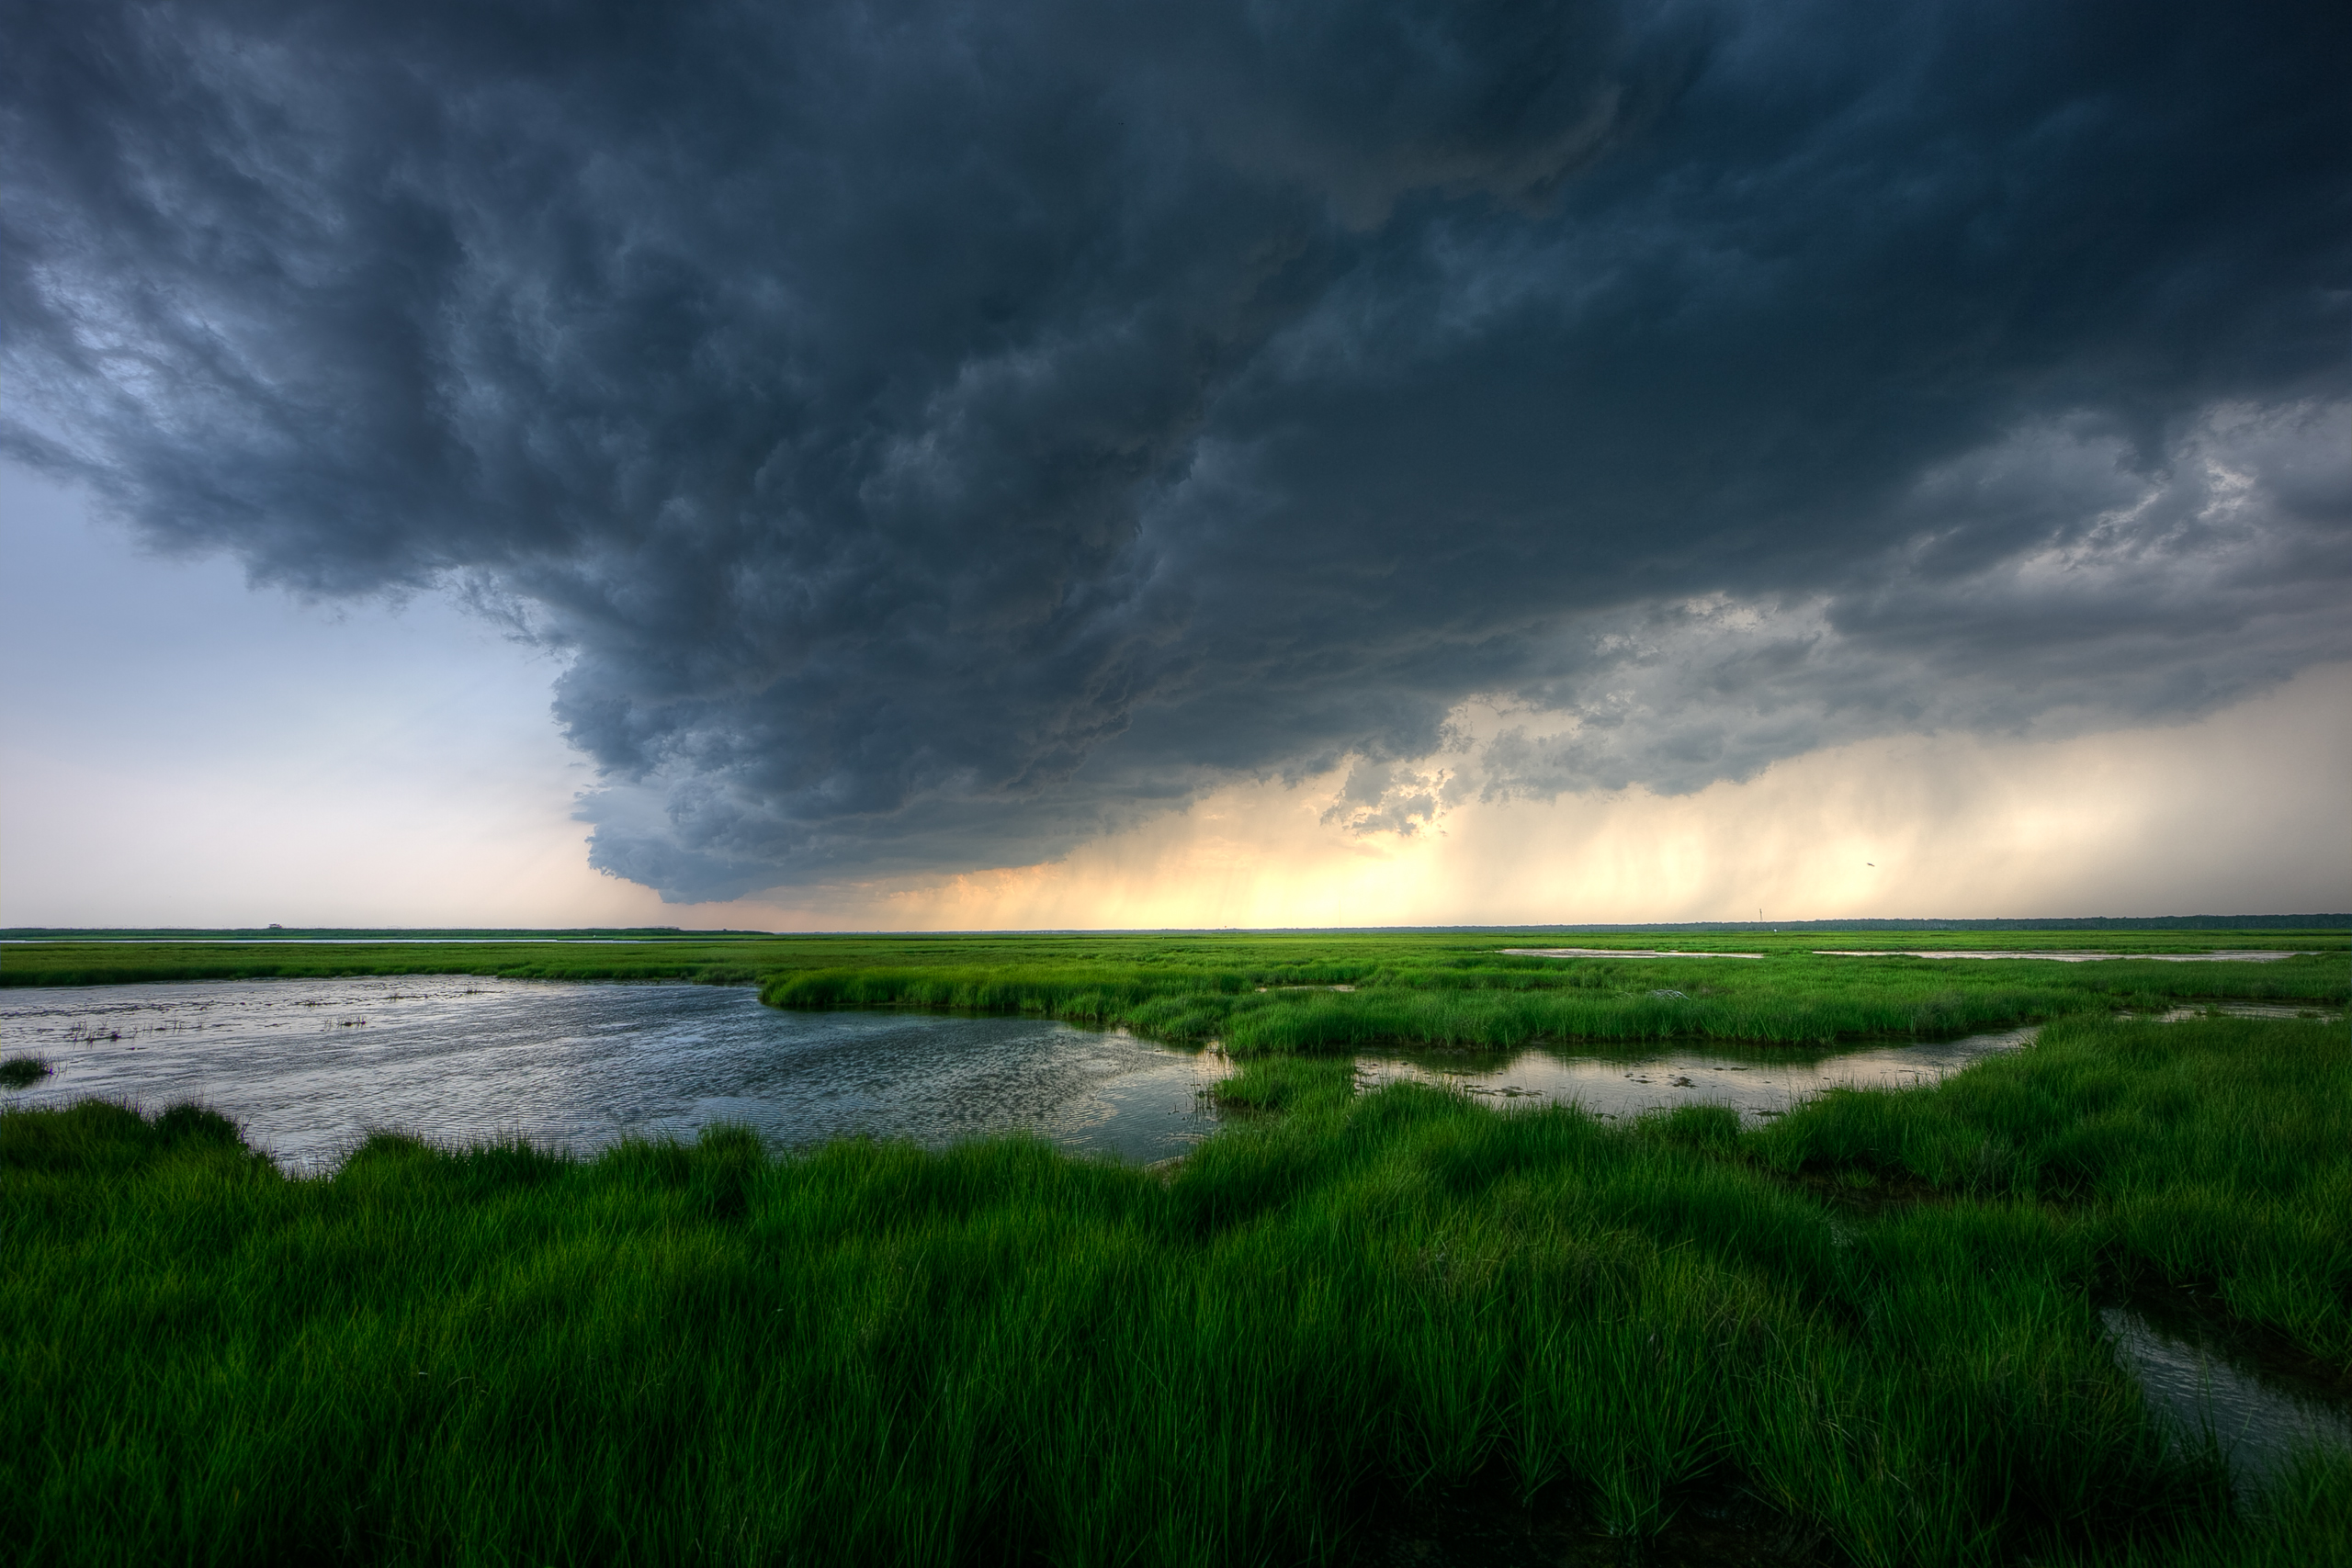 Storm clouds roll in over southern New Jersey marshland